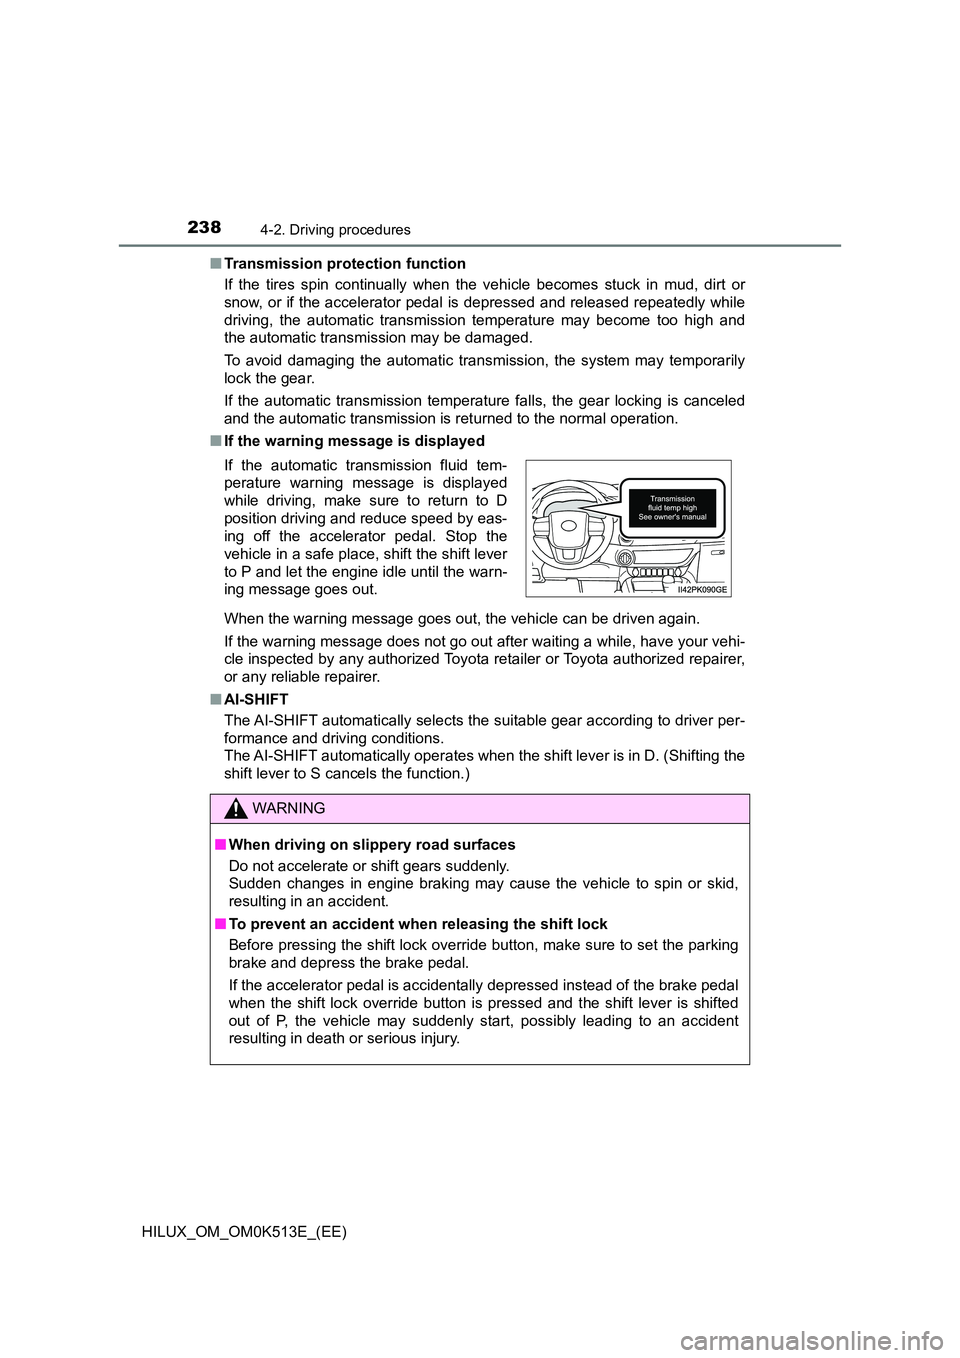 TOYOTA HILUX 2021  Owners Manual (in English) 2384-2. Driving procedures
HILUX_OM_OM0K513E_(EE) 
�Q Transmission protection function 
If the tires spin continually when the vehicle becomes stuck in mud, dirt or 
snow, or if the accelerator pedal 